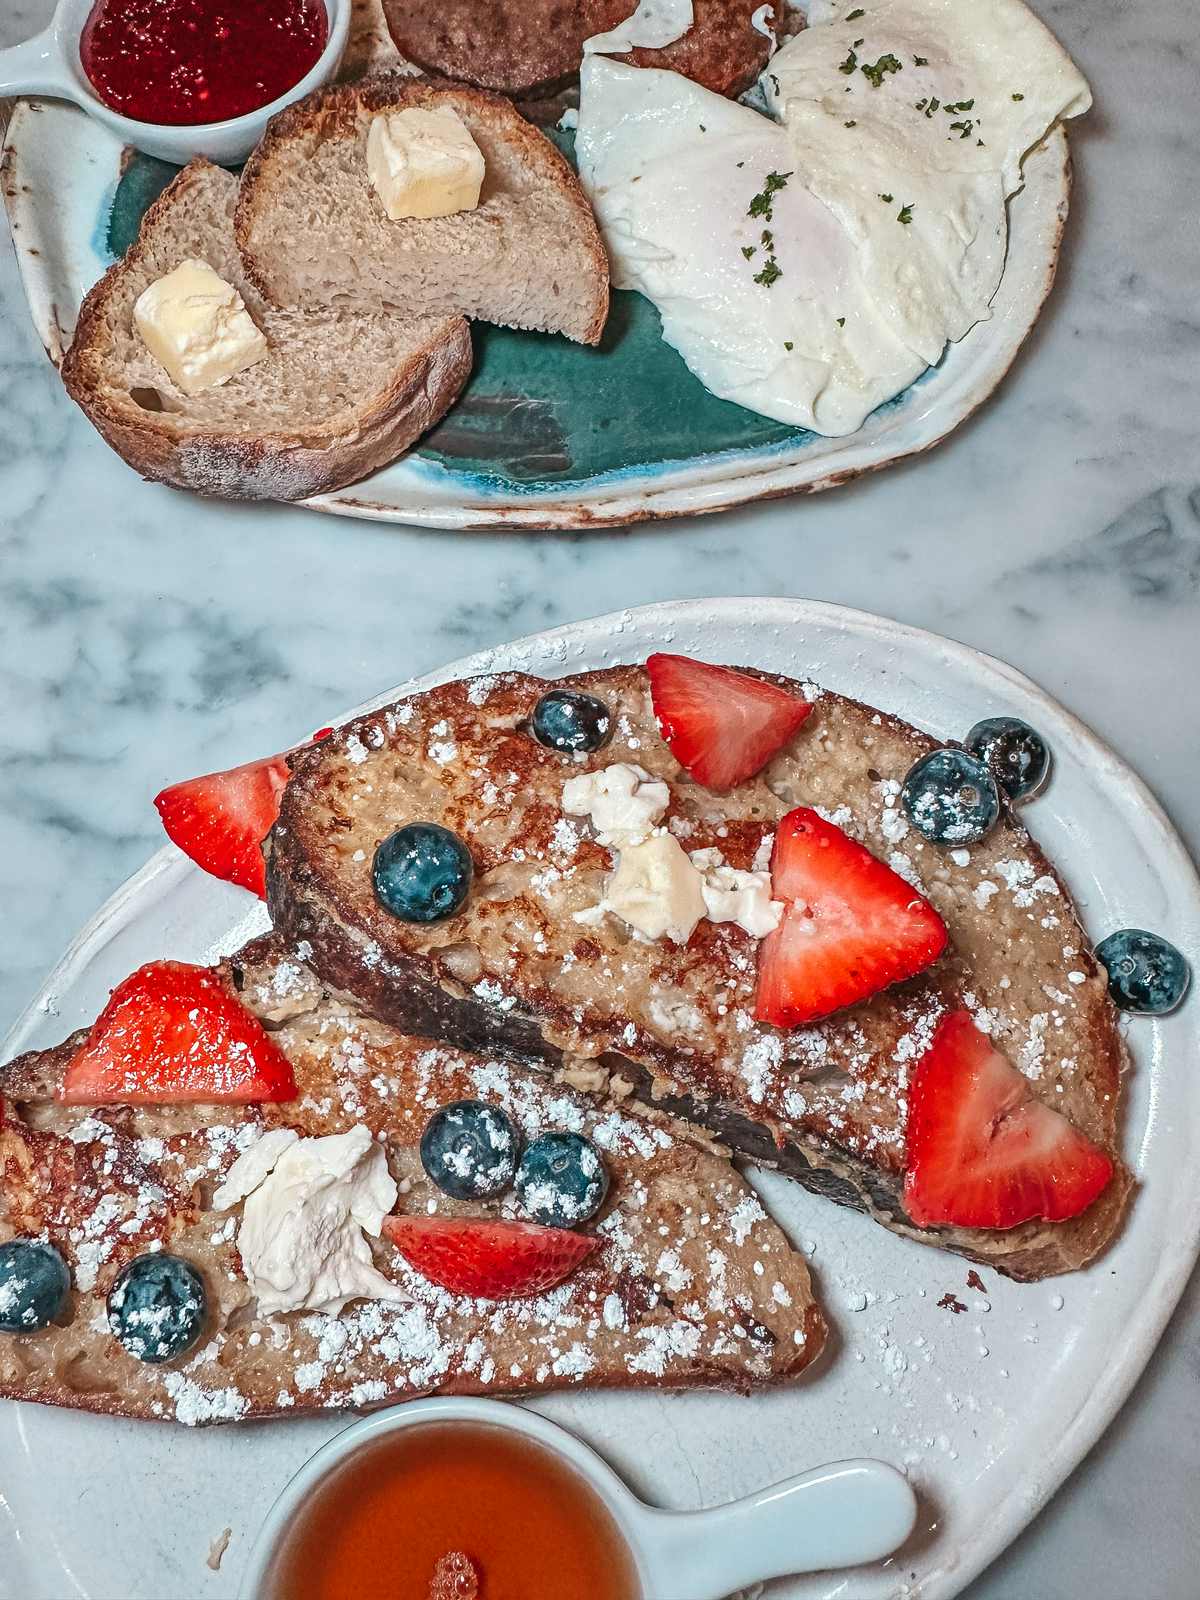 Sourdough French toast from Ivy Coffee and Tartines